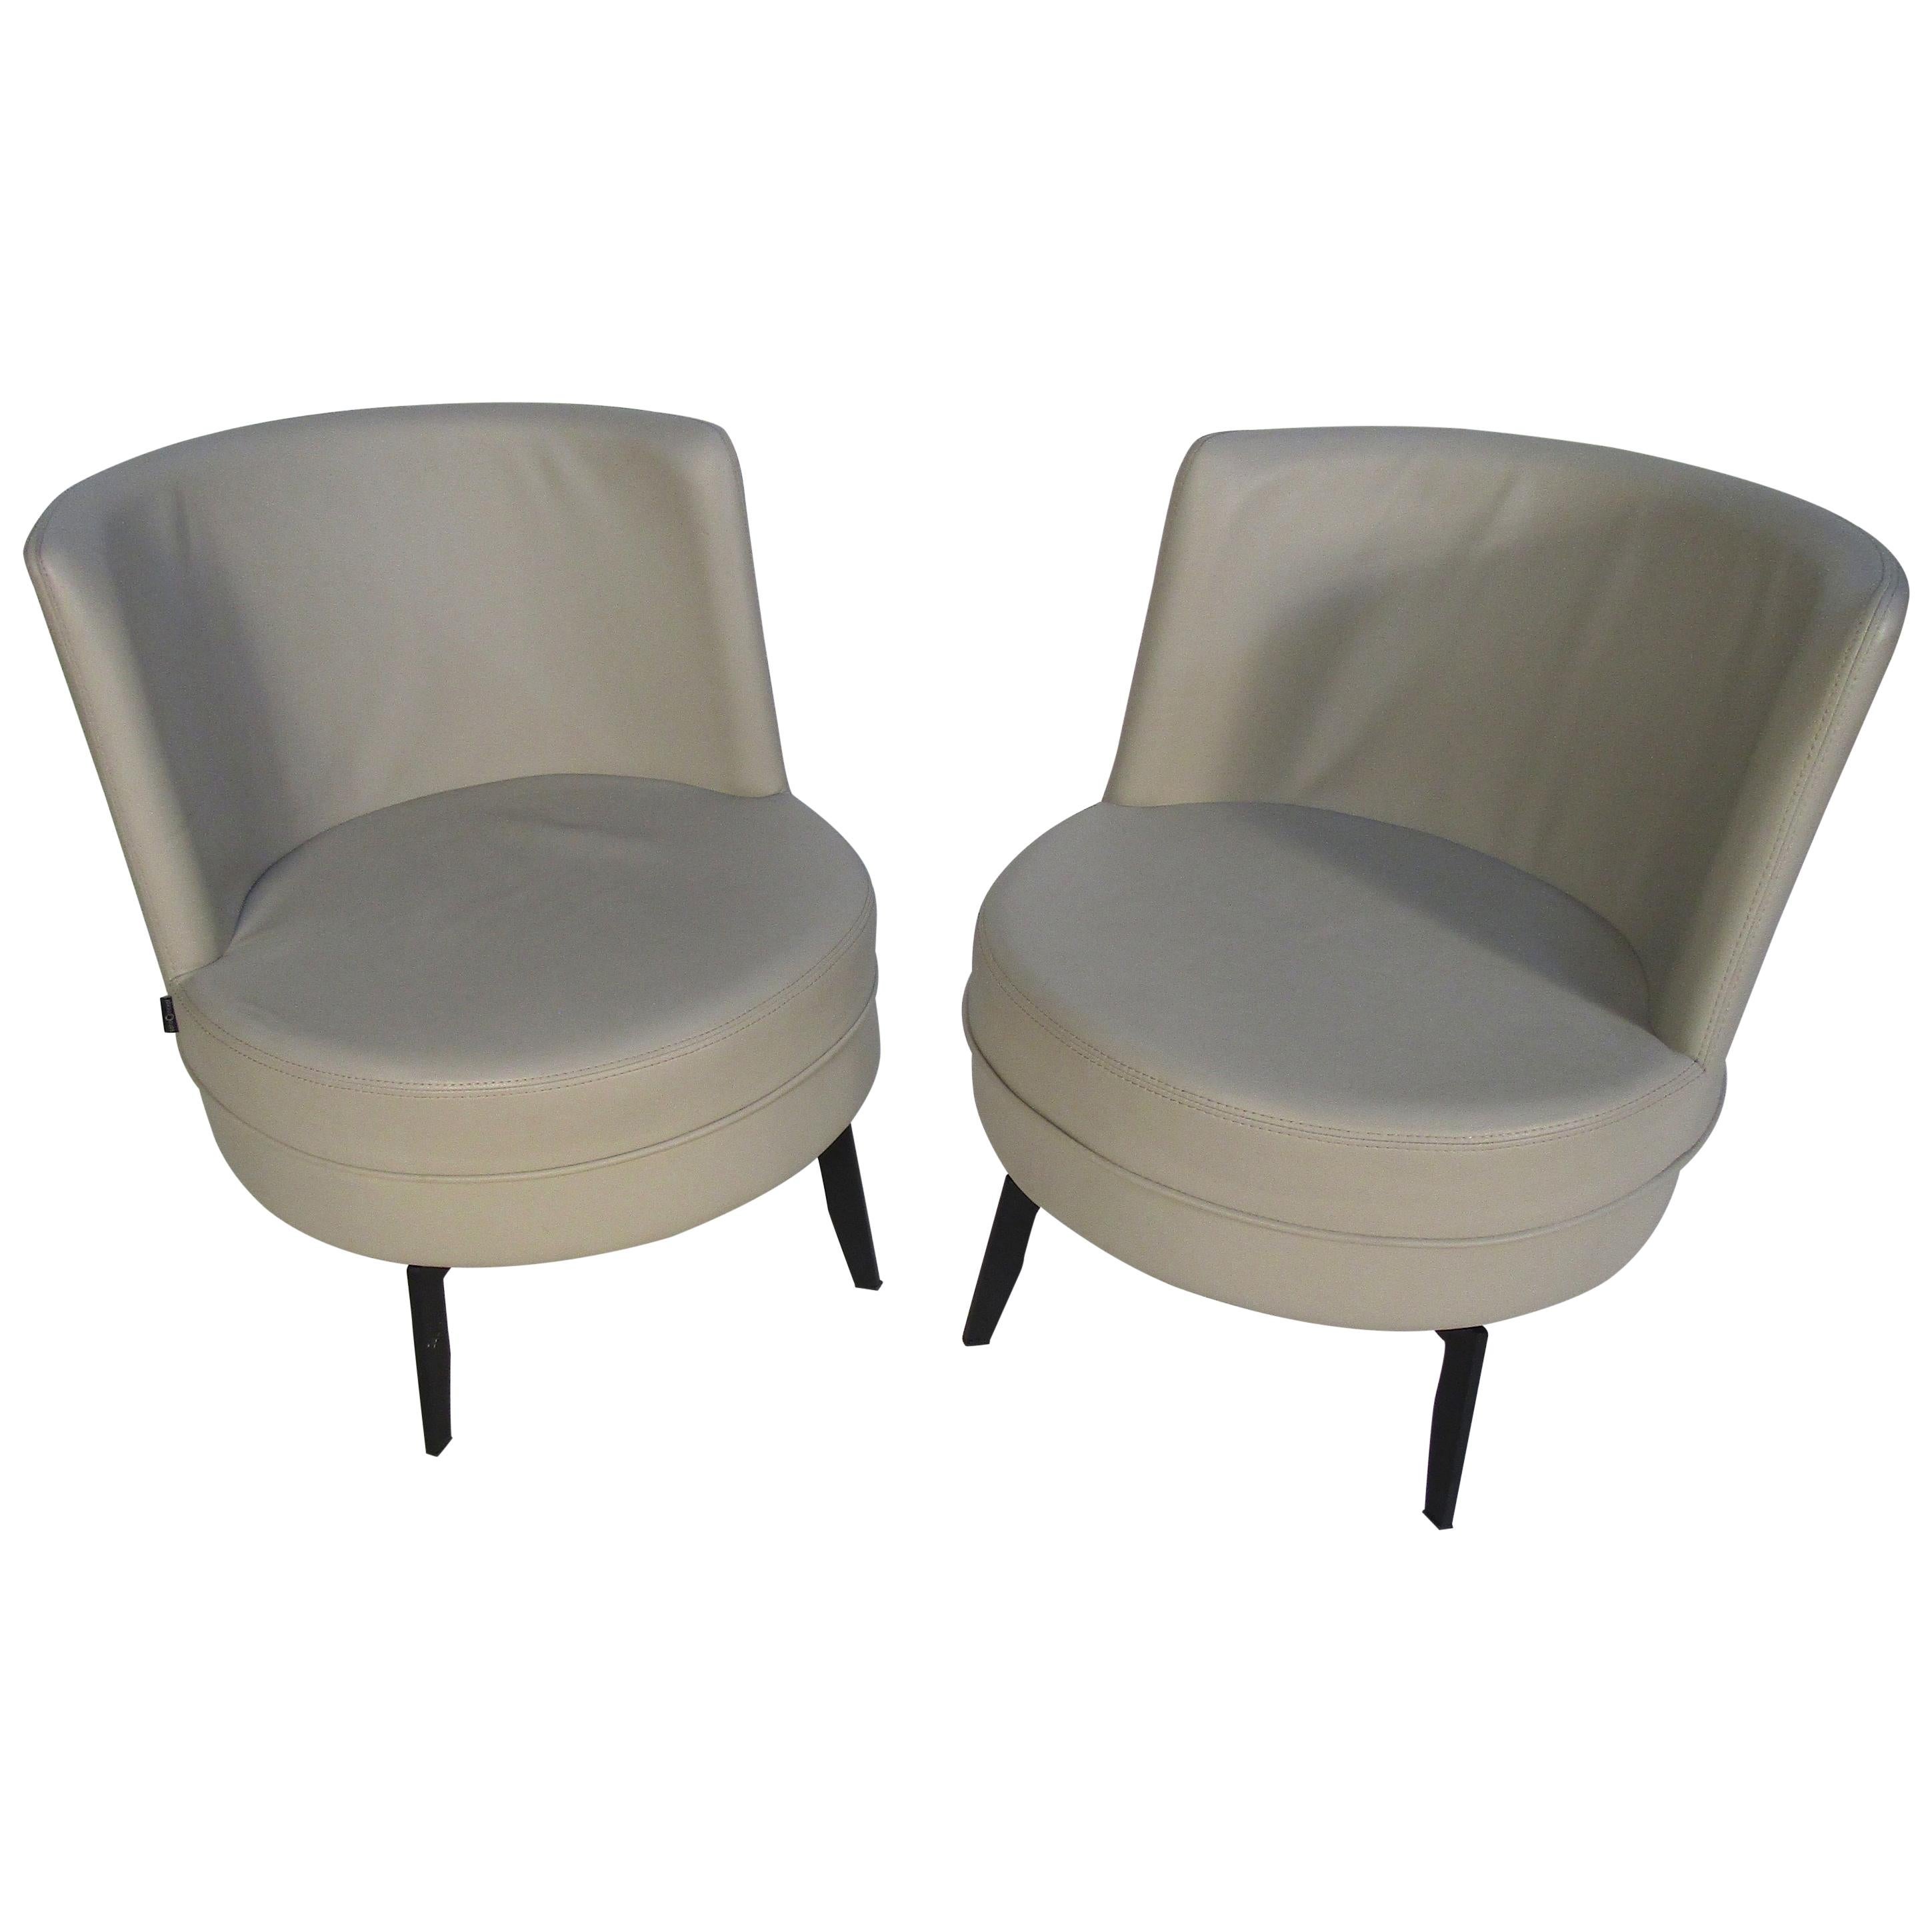 Pair of Midcentury Grey Leather Swivel Chairs